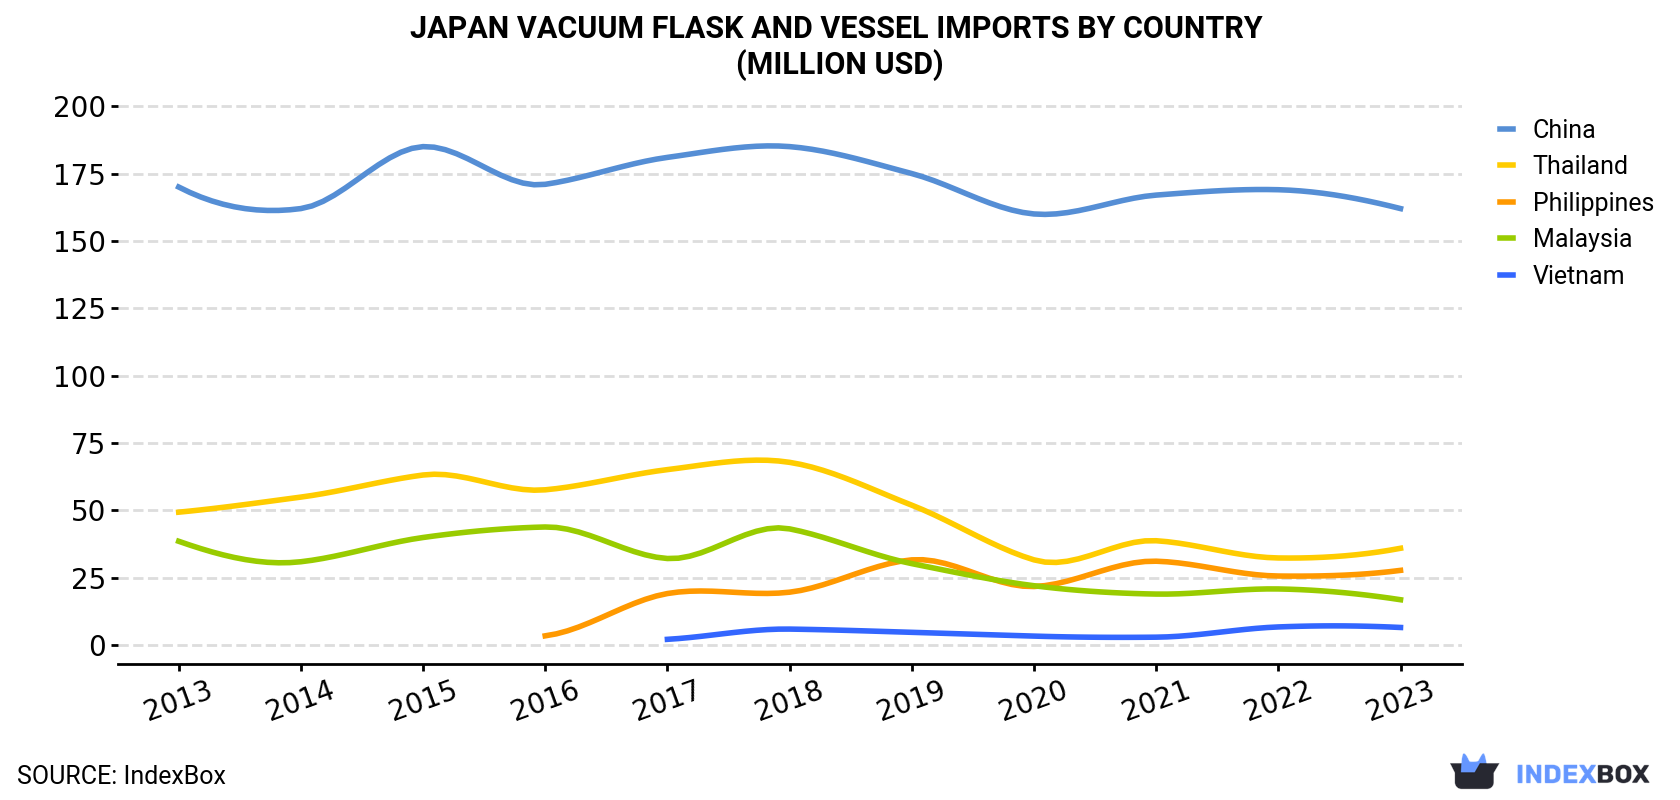 Japan Vacuum Flask and Vessel Imports By Country (Million USD)